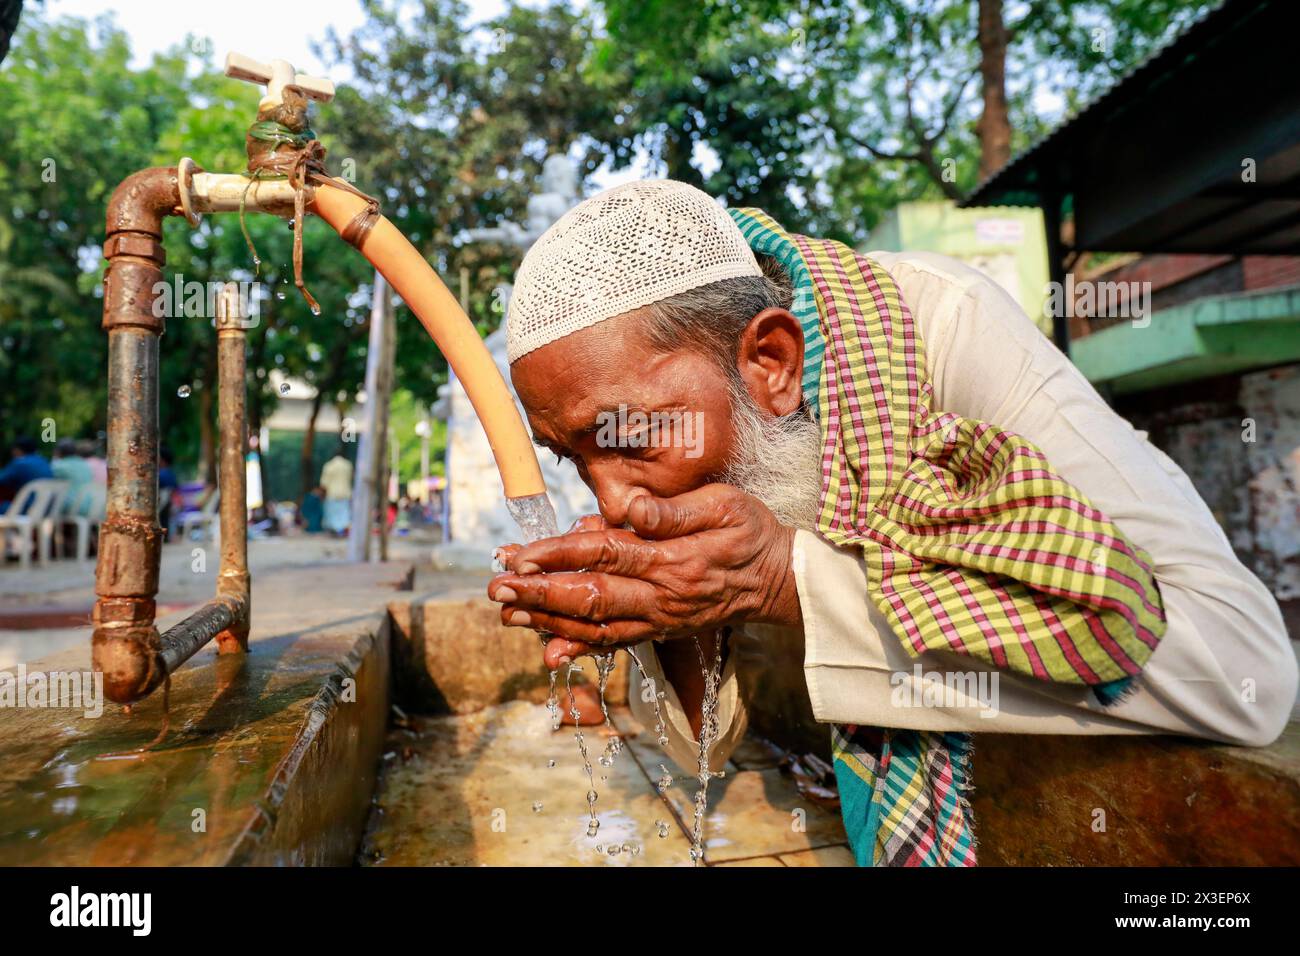 April 26, 2024, Dhaka, Bangladesh: People use roadside tap water to cool down themselves during the heat wave in Dhaka, Bangladesh, April 26, 2024. The country's capital, Dhaka, saw the temperature reach 40.6 degrees Celsius (105.1 degrees Fahrenheit) on April 16, the highest in 58 years, making people's lives unbearable for more than a week with low humidity in the air, according to Bangladesh Meteorological Department (BMD) officials. Five types of gas layers have been created in Dhaka's air. These gases have been produced from garbage dumps, brick kilns, vehicles and the fumes emitting from Stock Photo